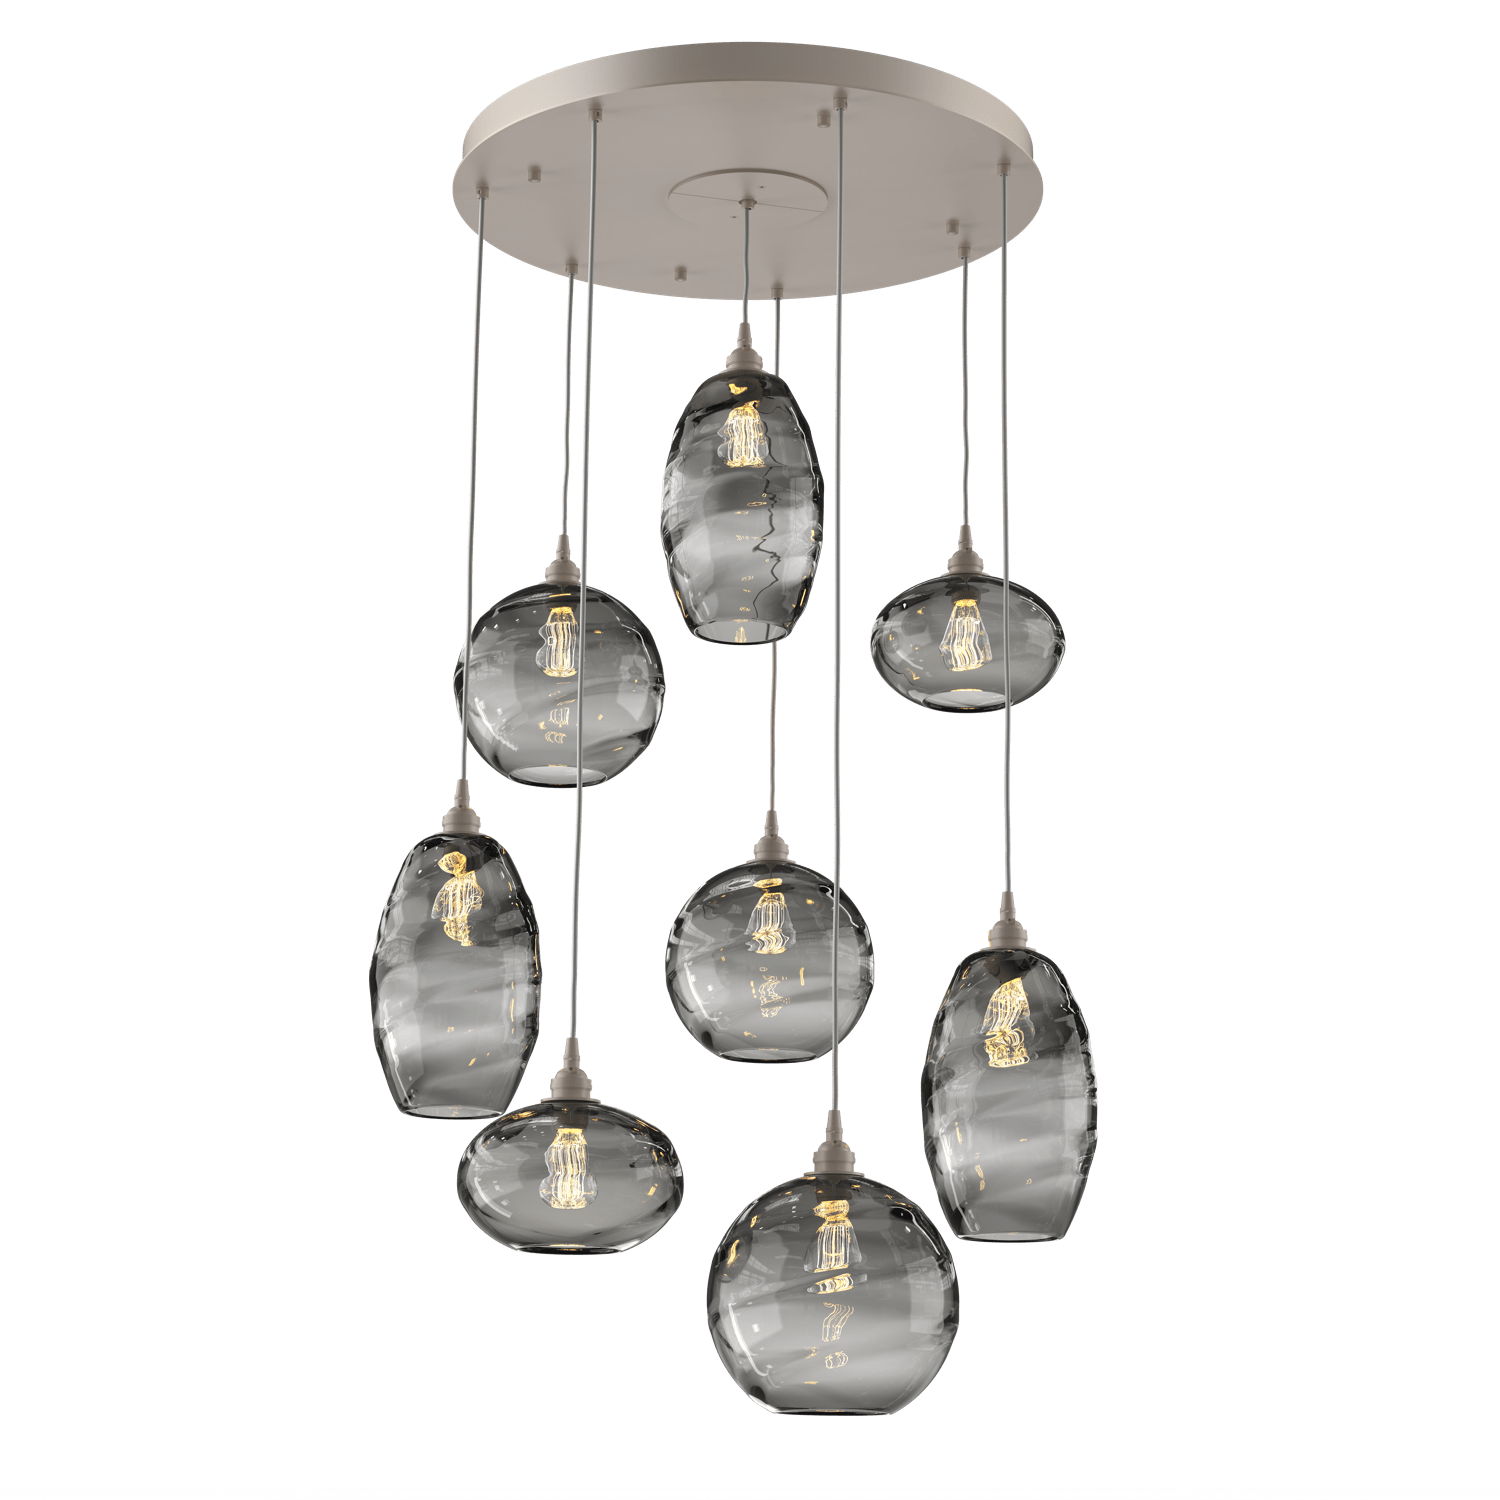 CHB0048-08-BS-OS-Hammerton-Studio-Optic-Blown-Glass-Misto-8-light-round-pendant-chandelier-with-metallic-beige-silver-finish-and-optic-smoke-blown-glass-shades-and-incandescent-lamping